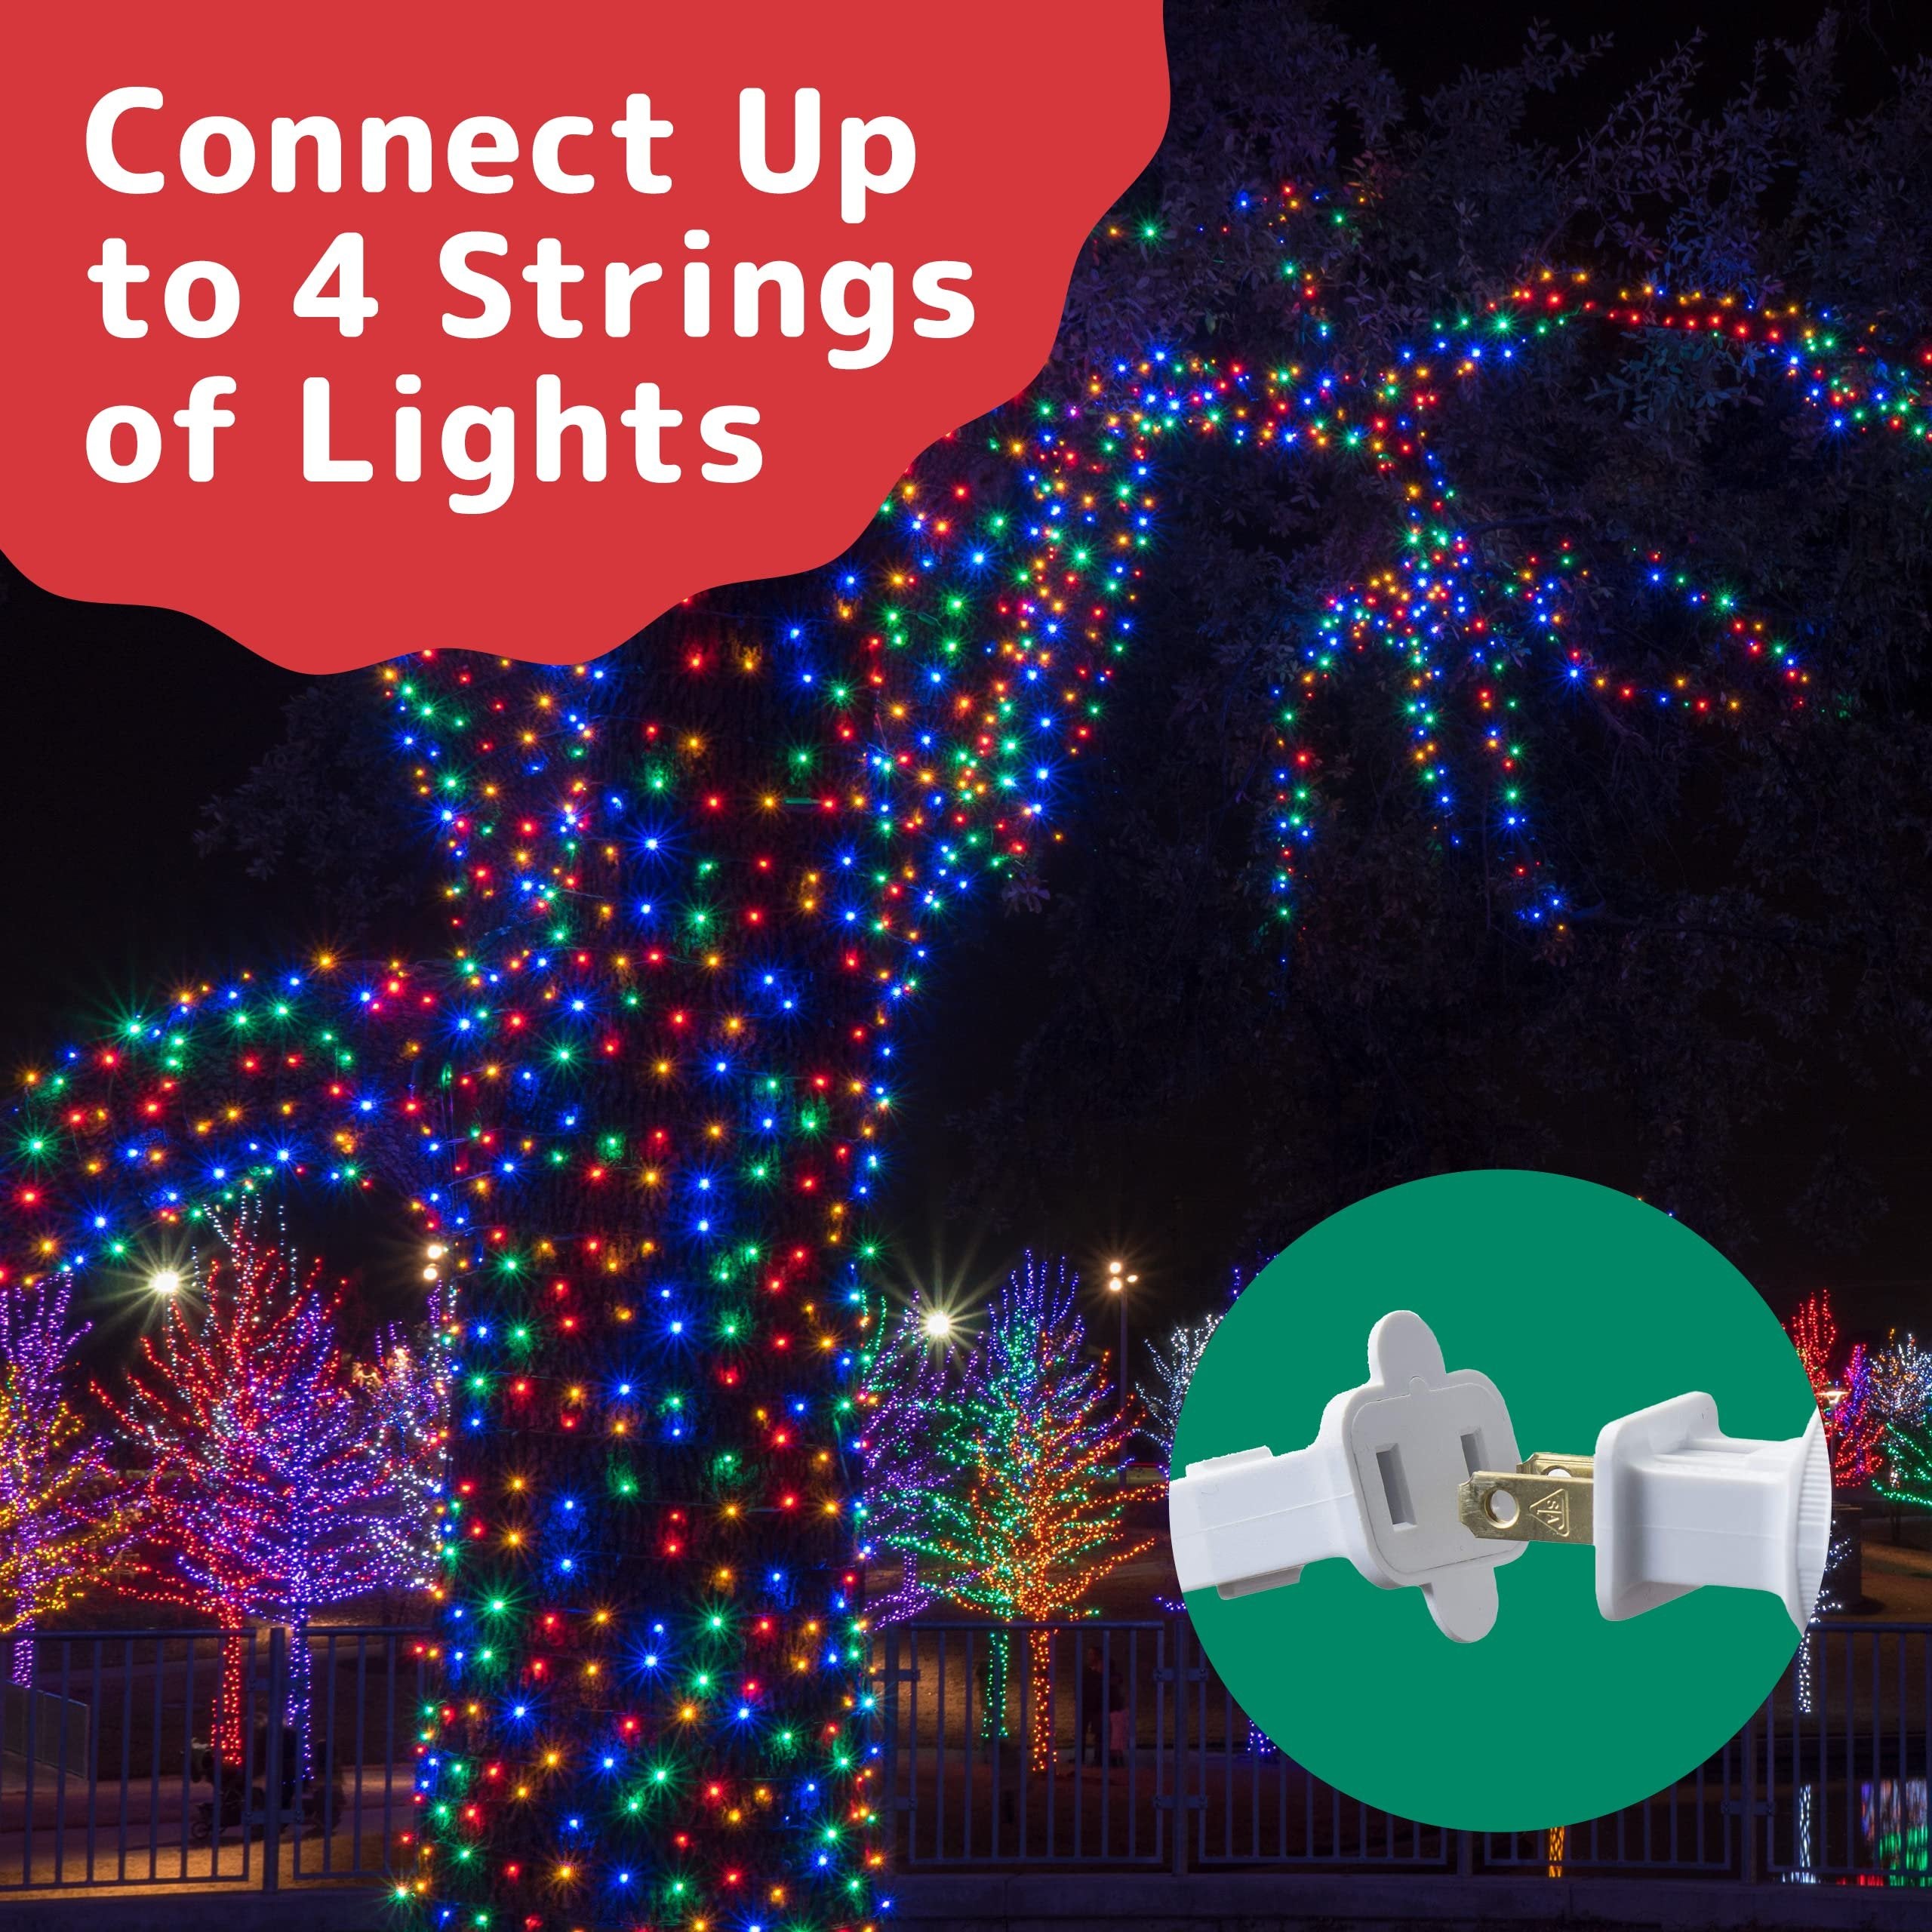 PREXTEX Bright & Colorful Christmas Lights (40 Feet, 200 Lights) - Fall Decor & Christmas Tree Lights with White Wire - Indoor/Outdoor String Lights - Multi-Color Twinkle Lights